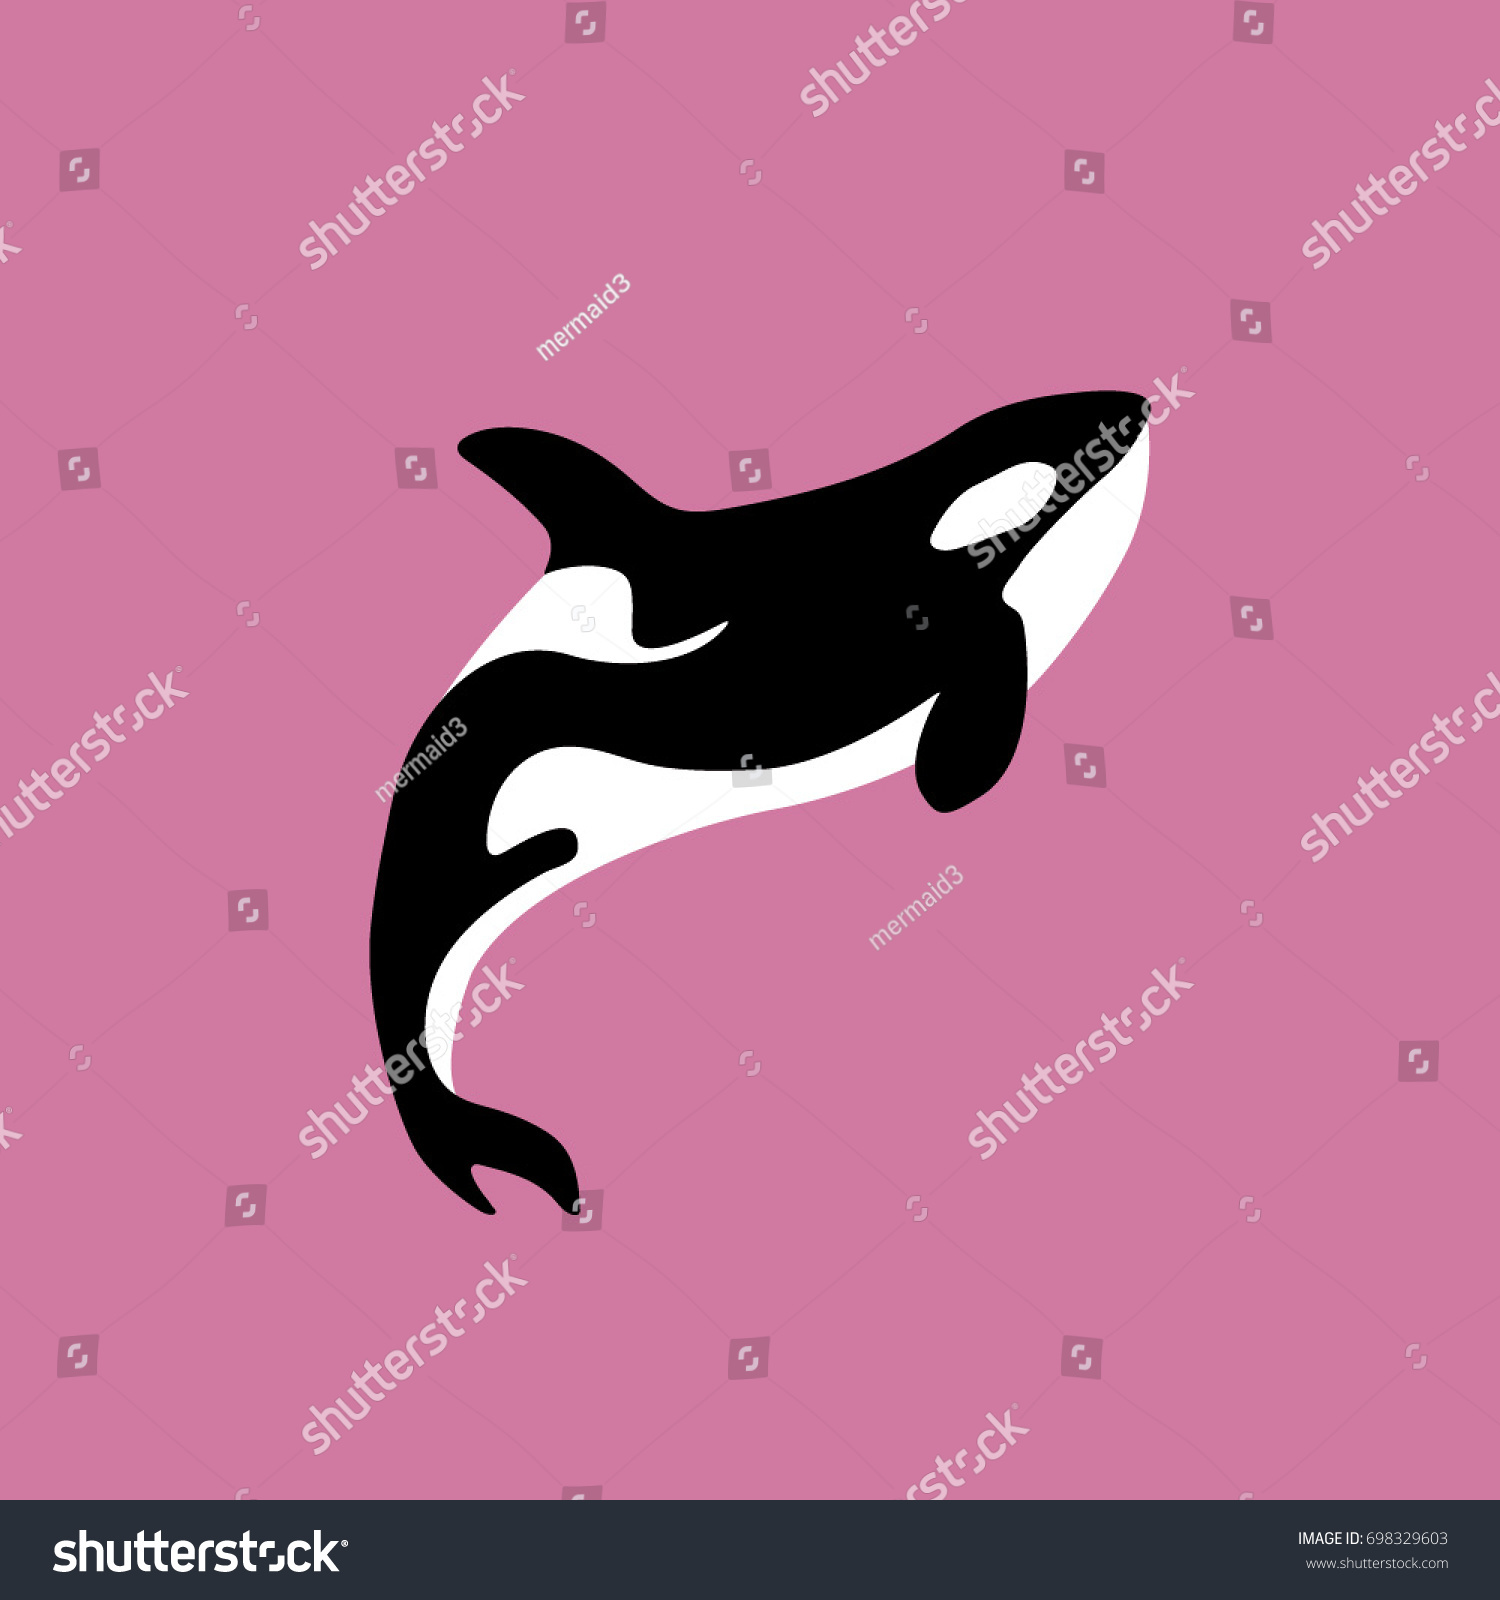 Mermaid swimming with an orca whale